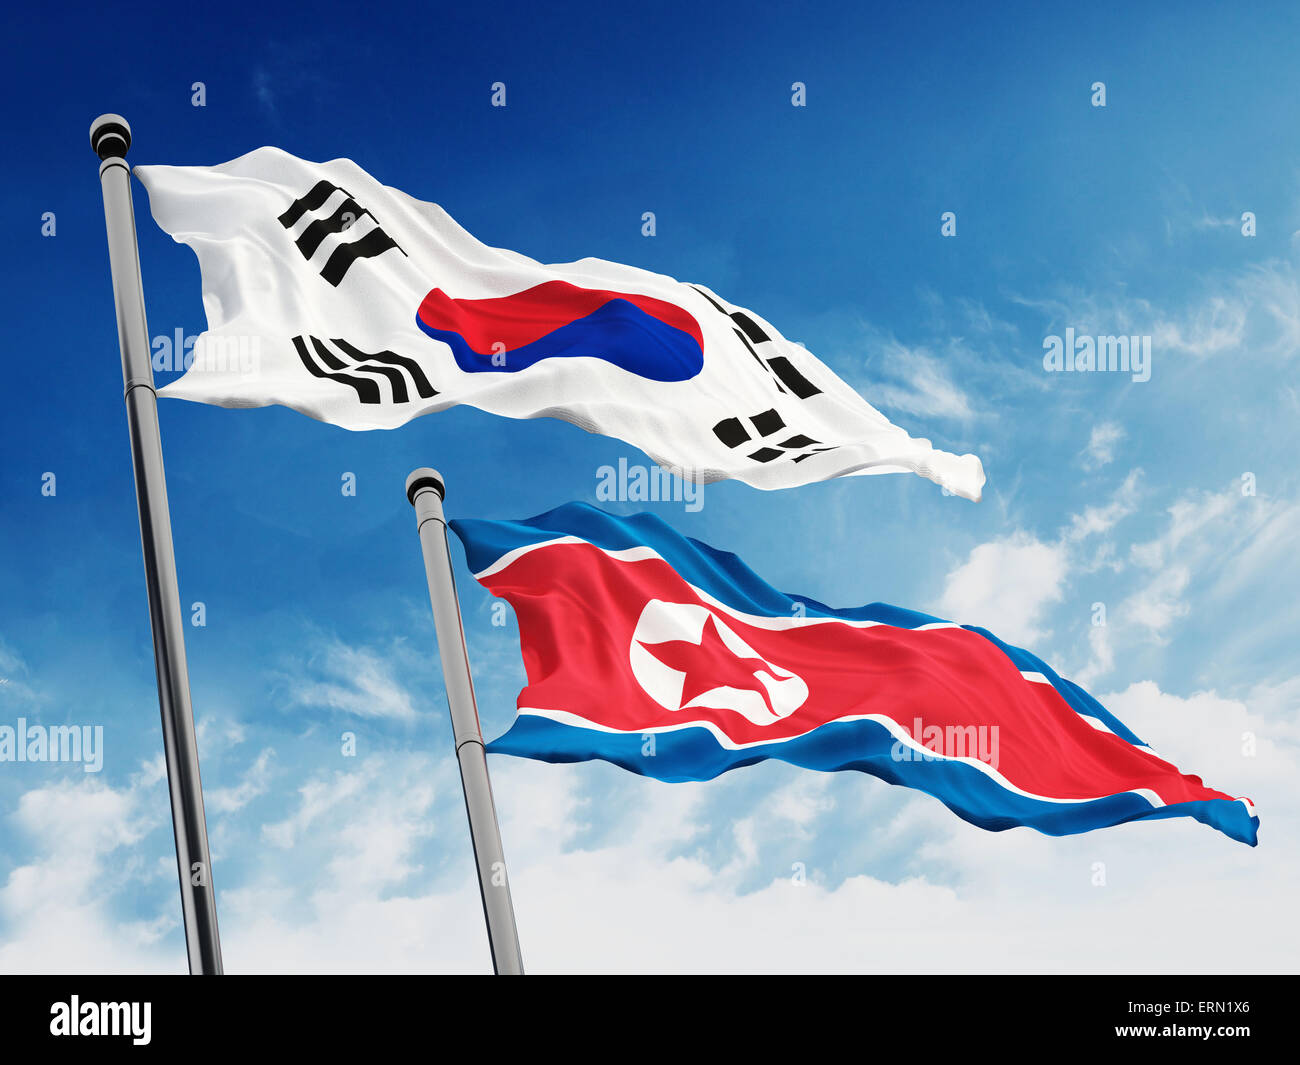 South and North Korea flags against blue sky background. Stock Photo